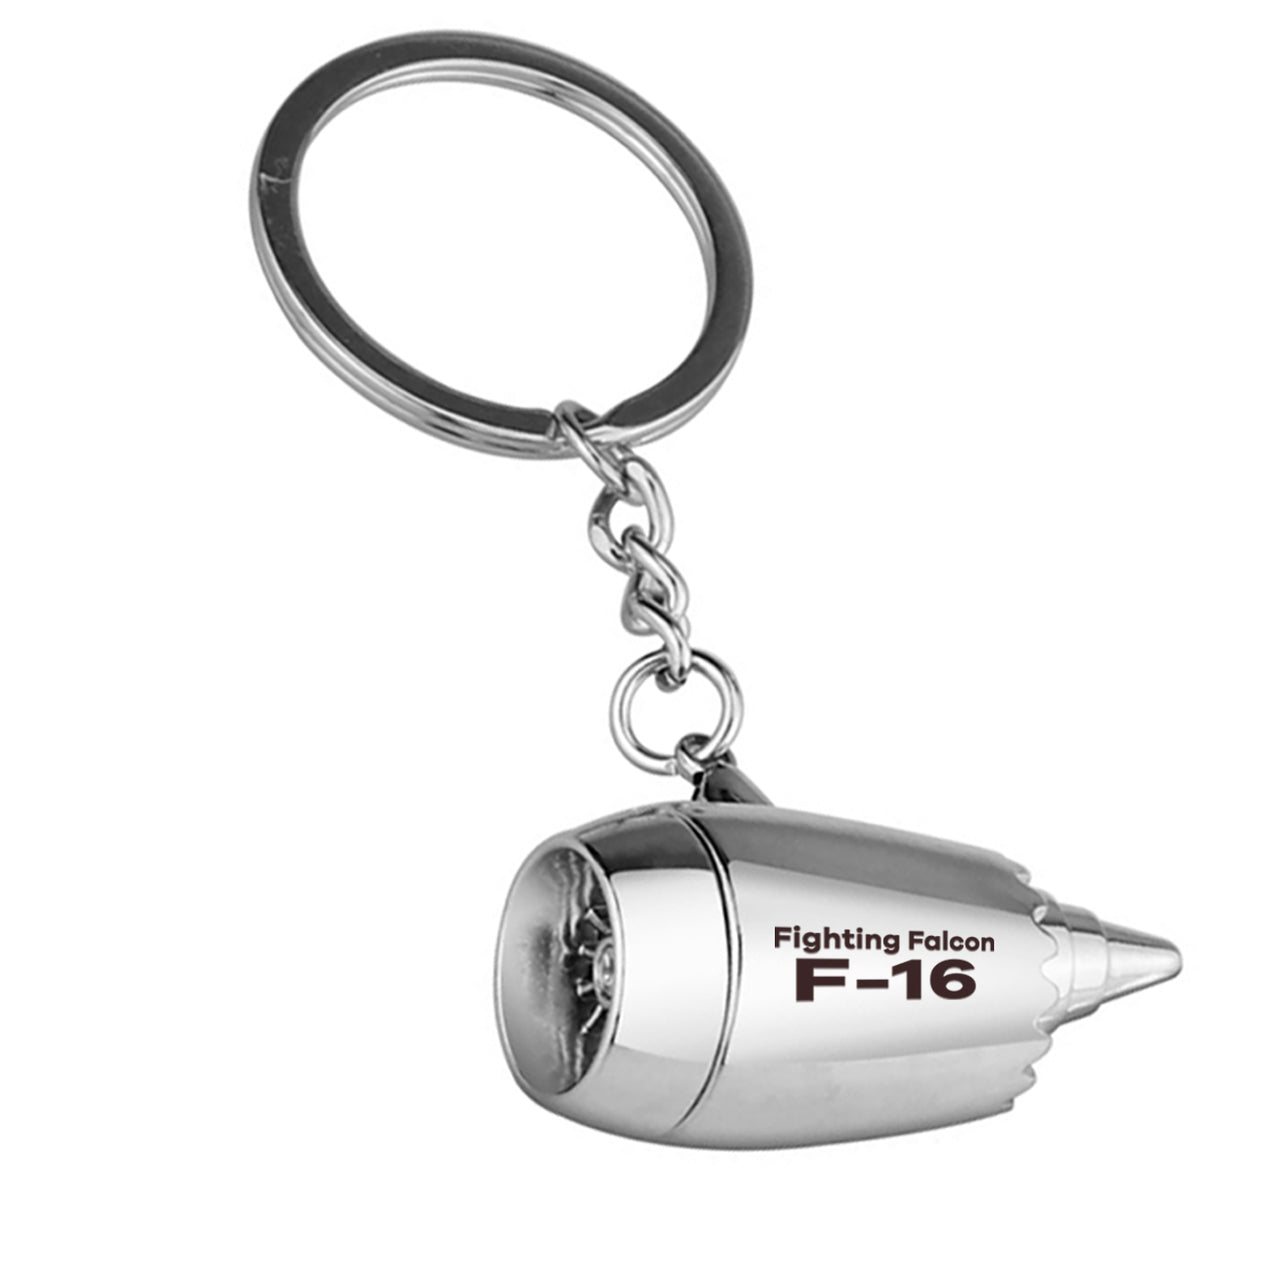 The Fighting Falcon F16 Designed Airplane Jet Engine Shaped Key Chain